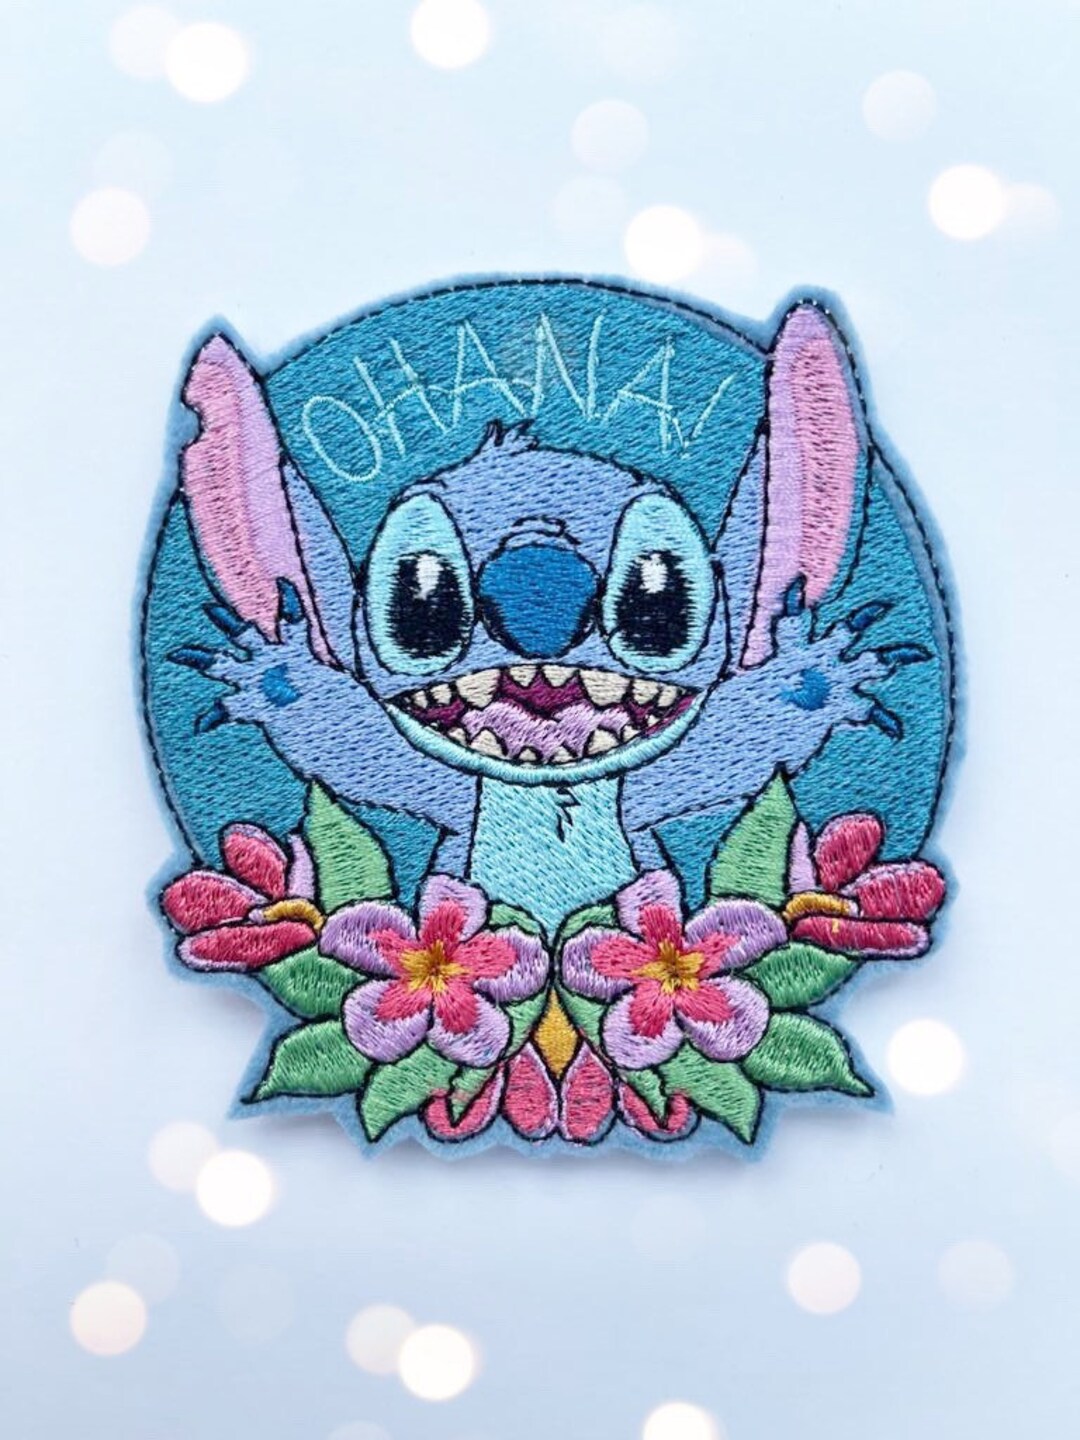 LILO & STITCH in LAWN CHAIR DRINKING FRUITY BEVERAGE New DISNEY Iron On  Patch